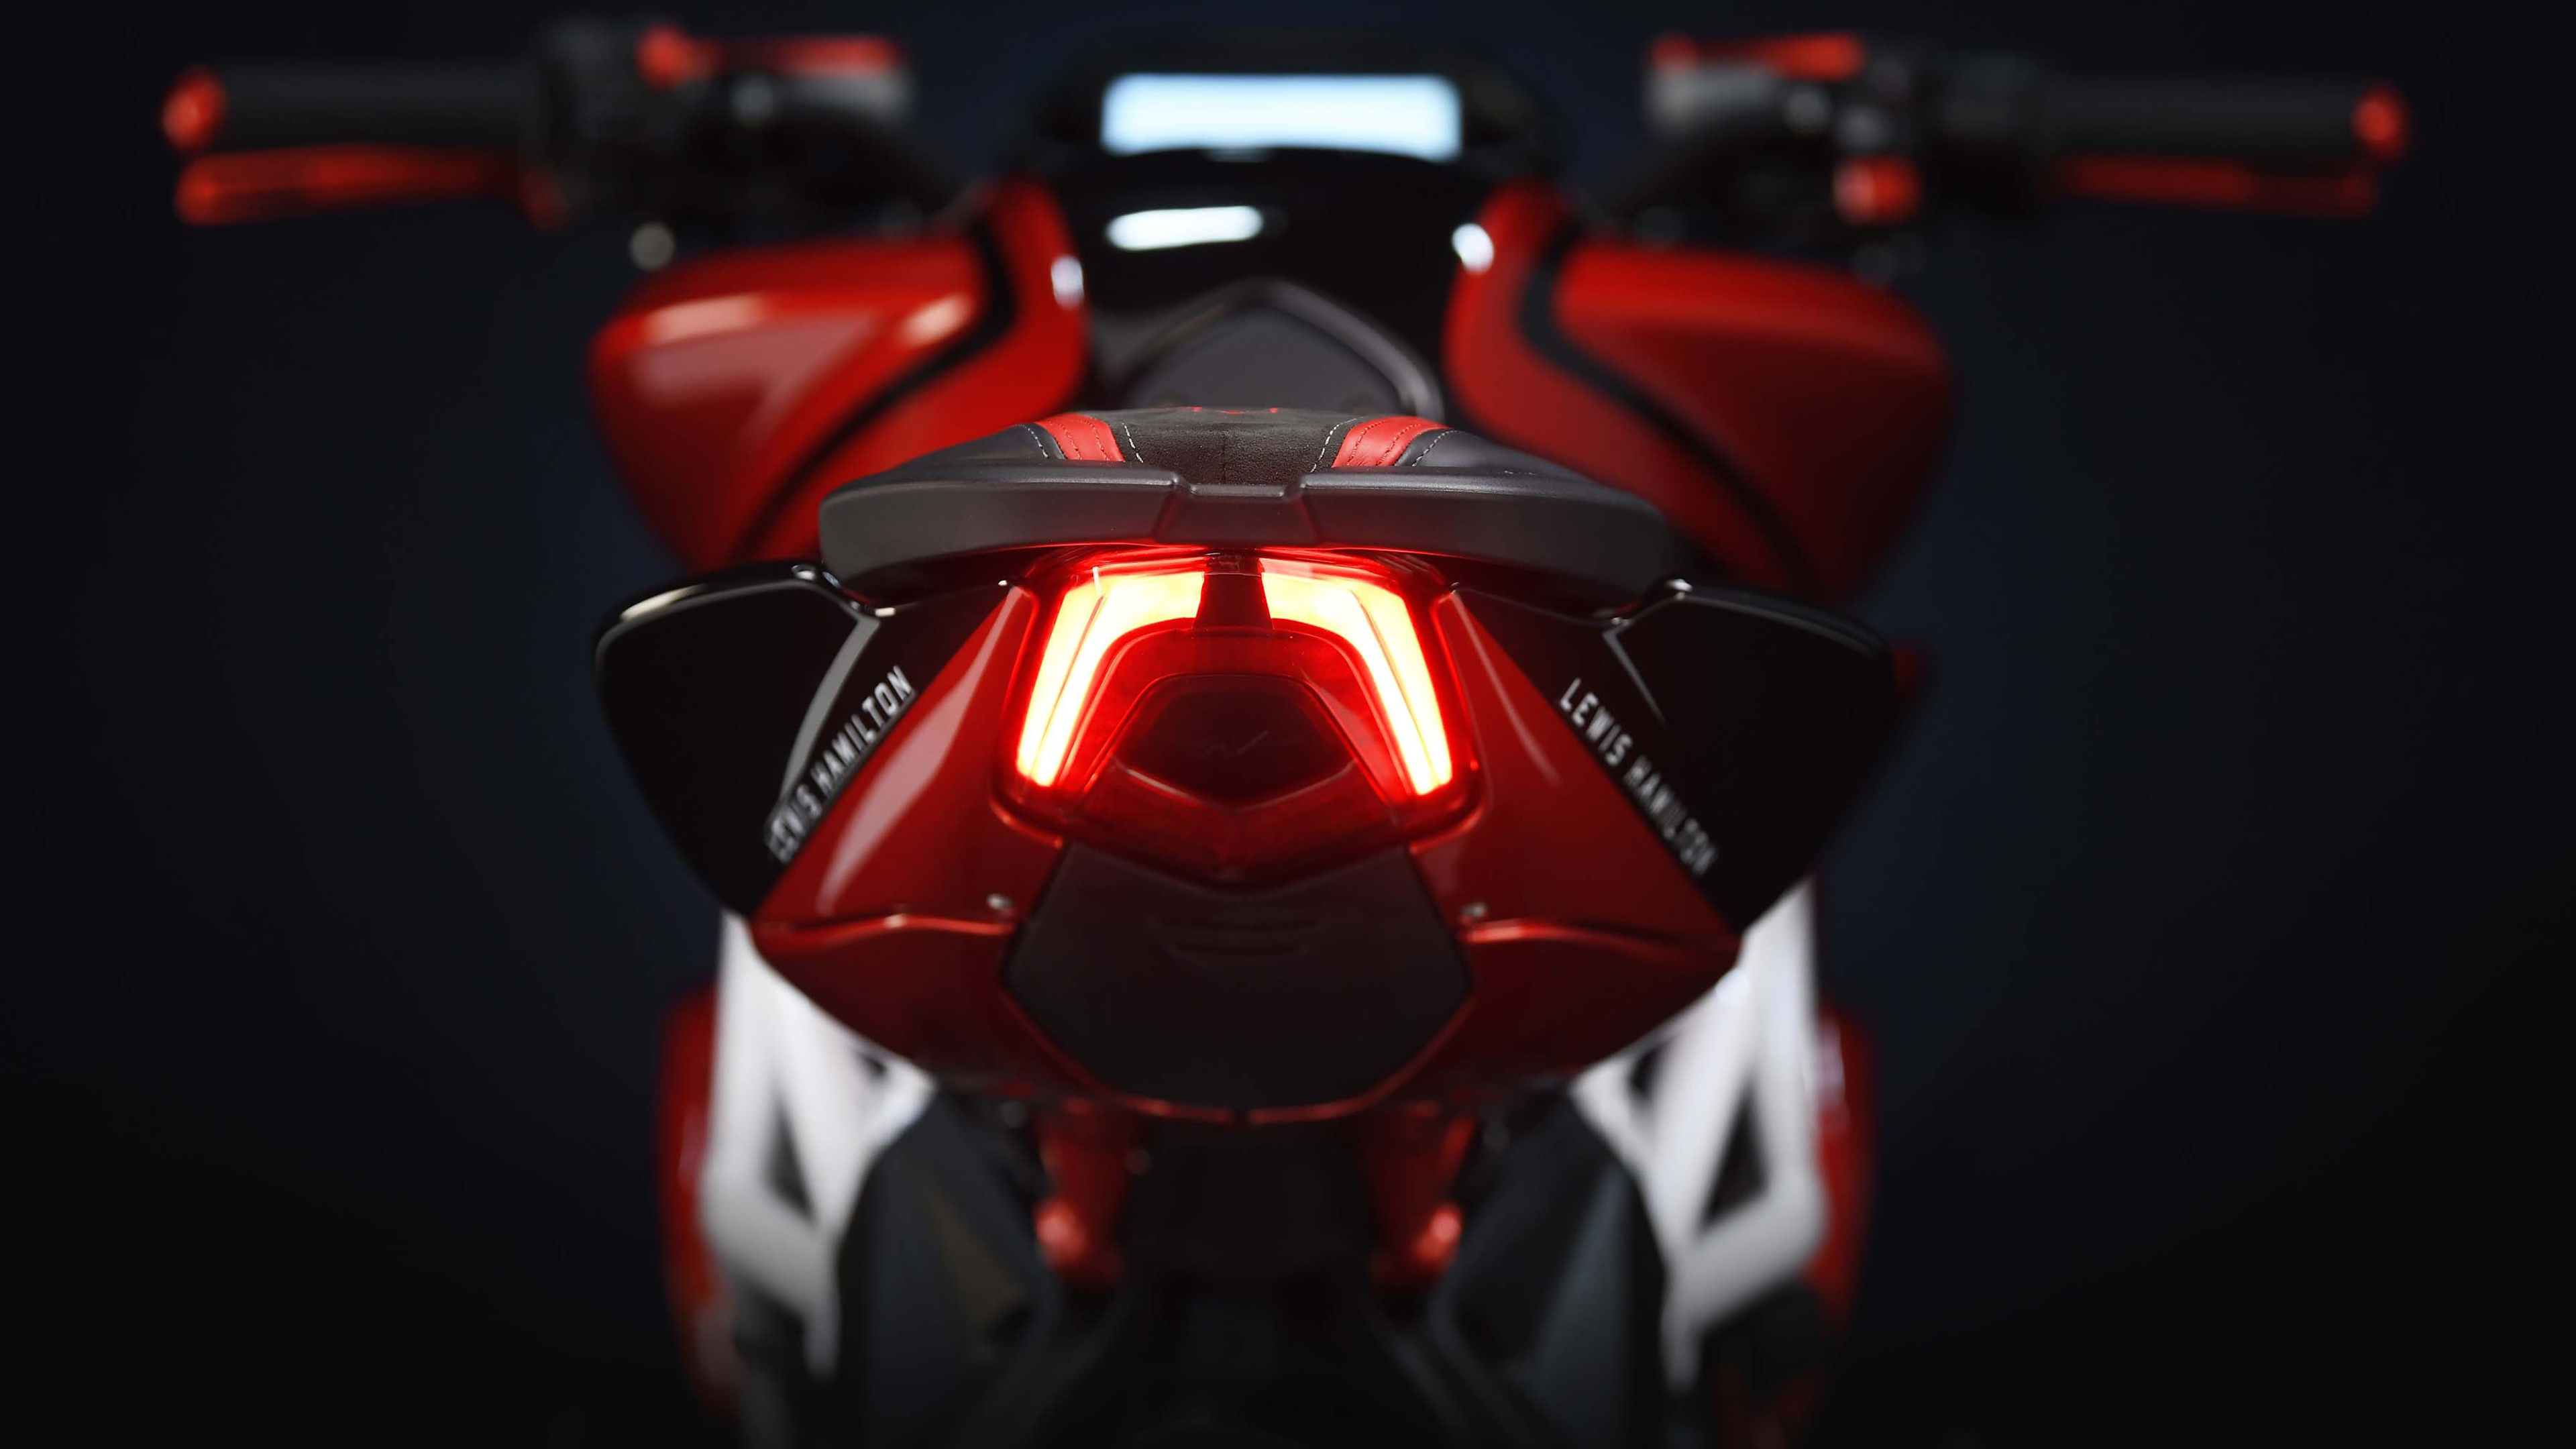 MV Agusta Brutale 800 RR LH44 Edition LED Tail lights Wallpapers